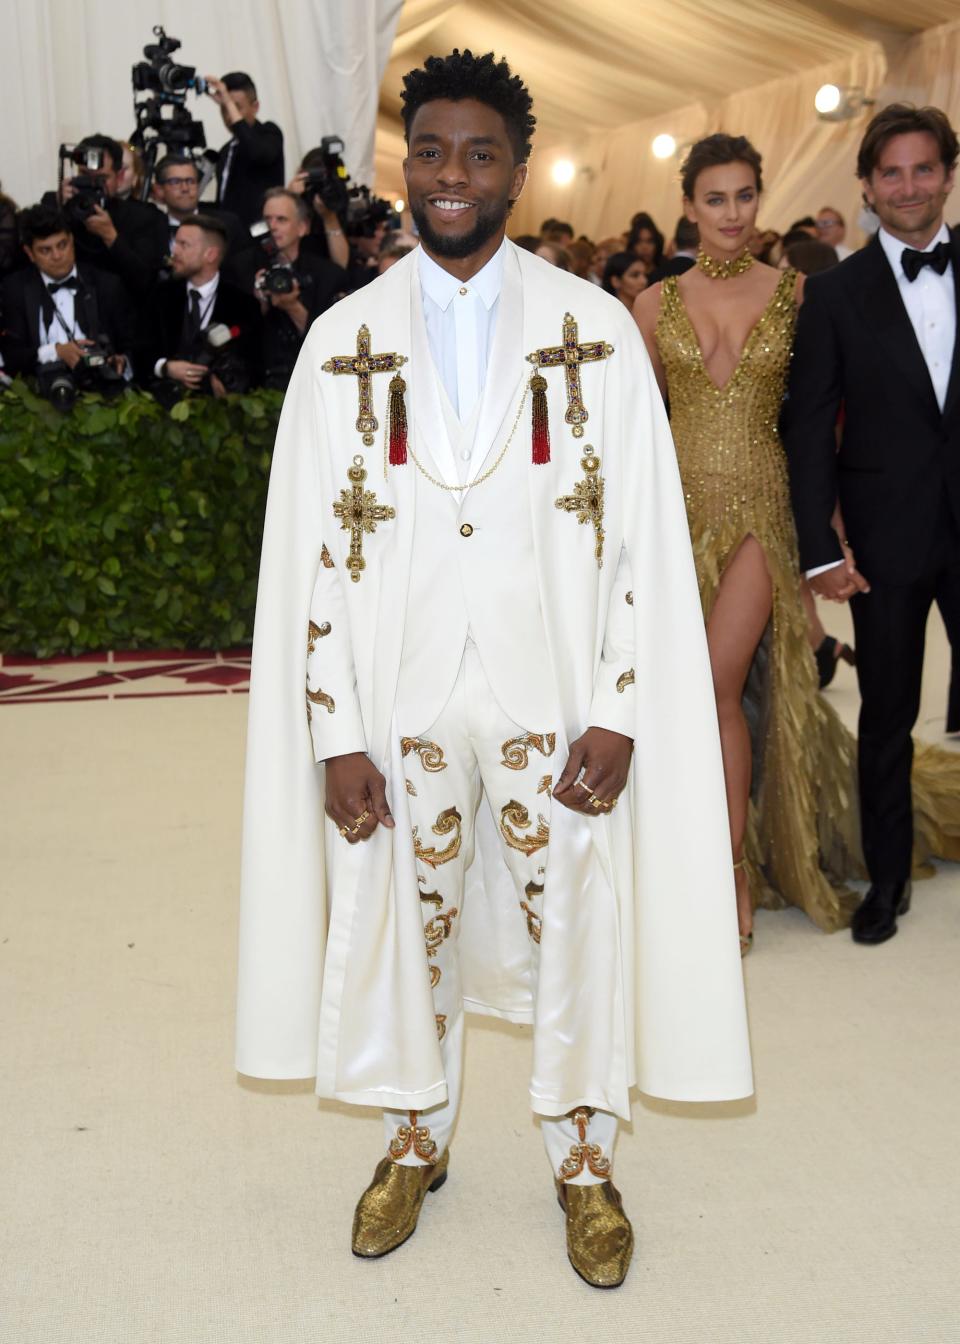 Chadwick Boseman arrives at the Met Gala wearing a white suit and cape adorned with gold crosses.